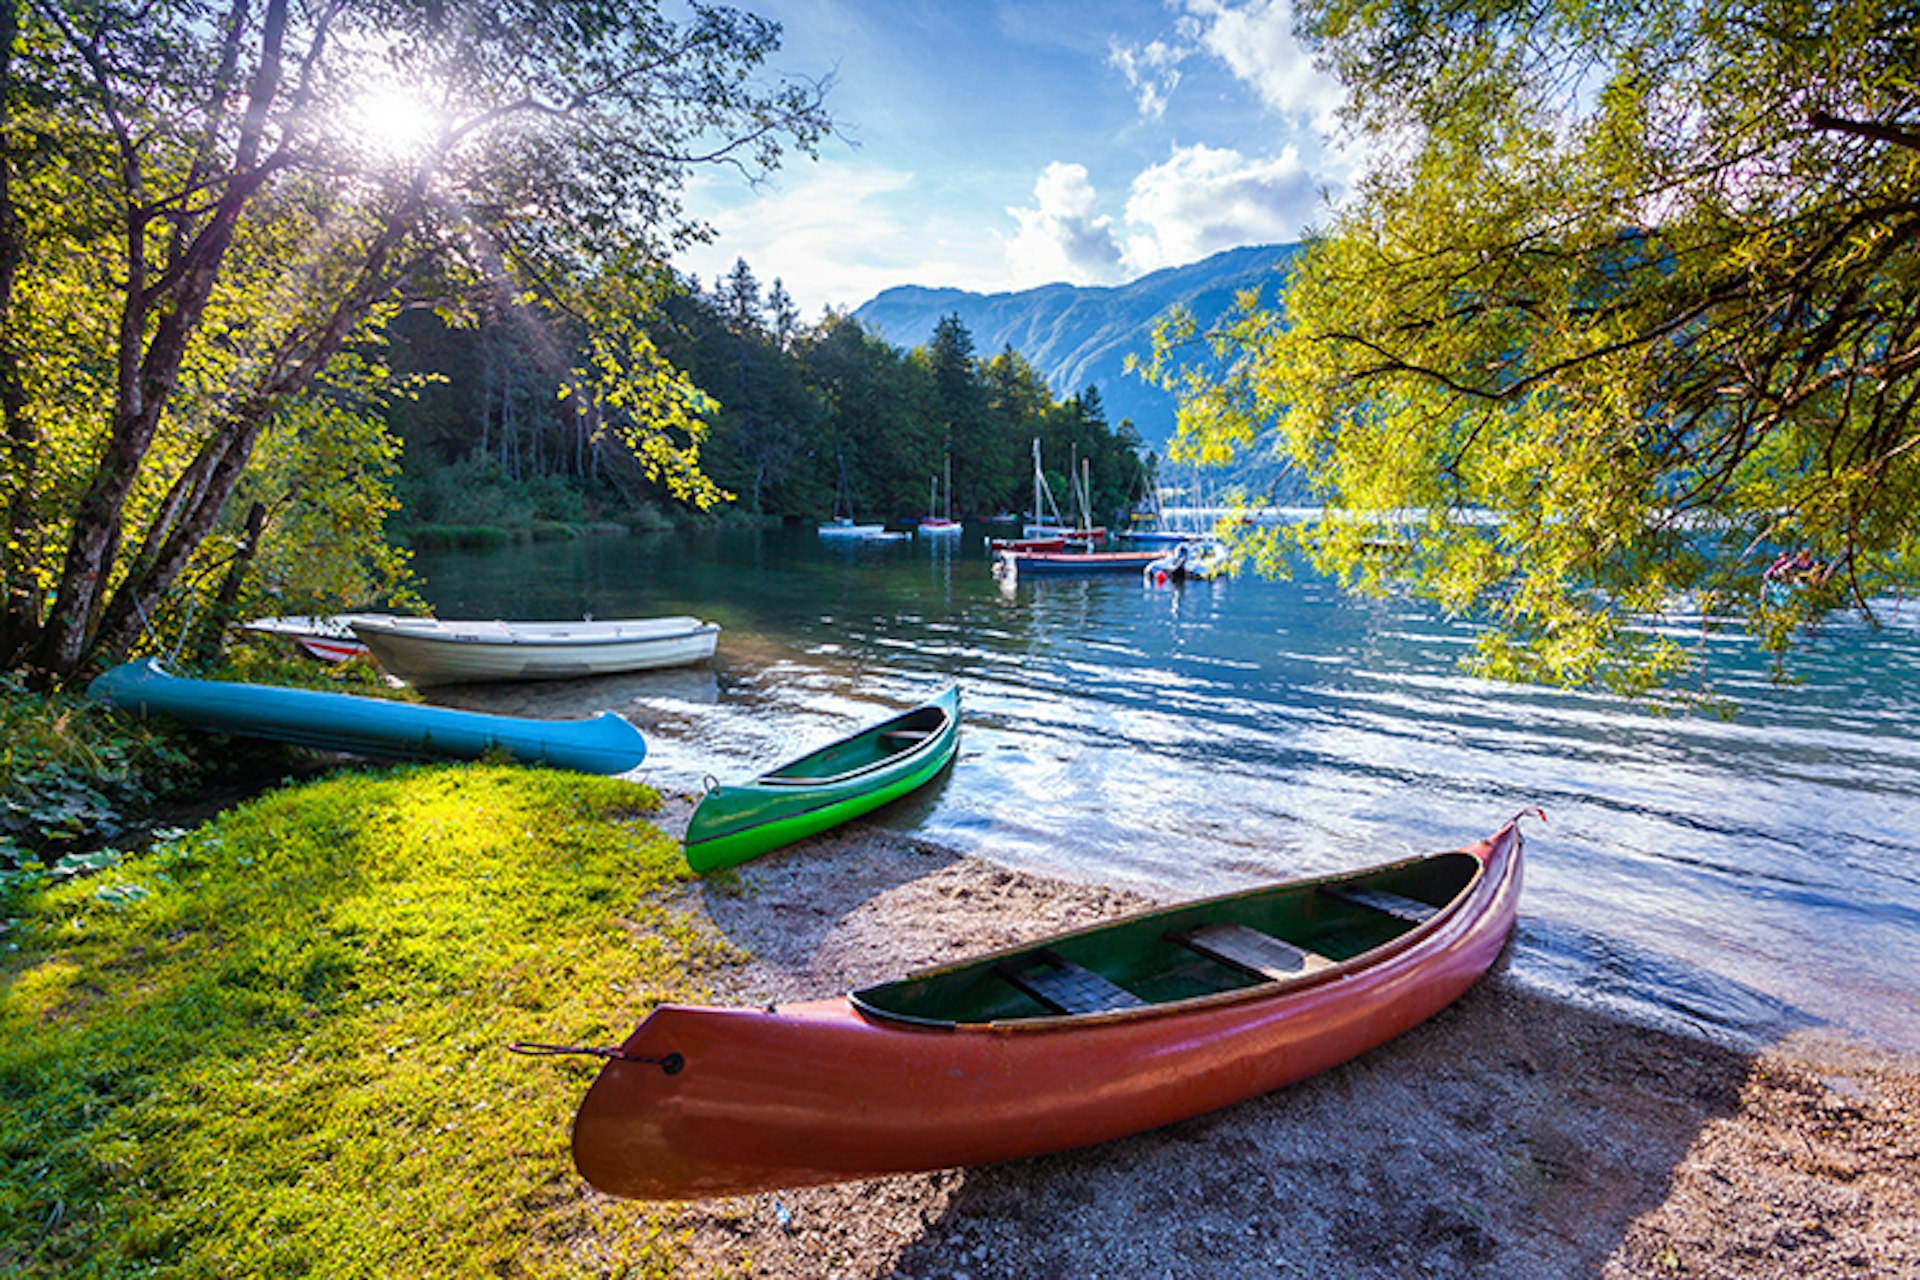 Bohinj Lake is the equal of Slovenia's better-known Bled. Image by Andrew Mayovskyy / Shutterstock